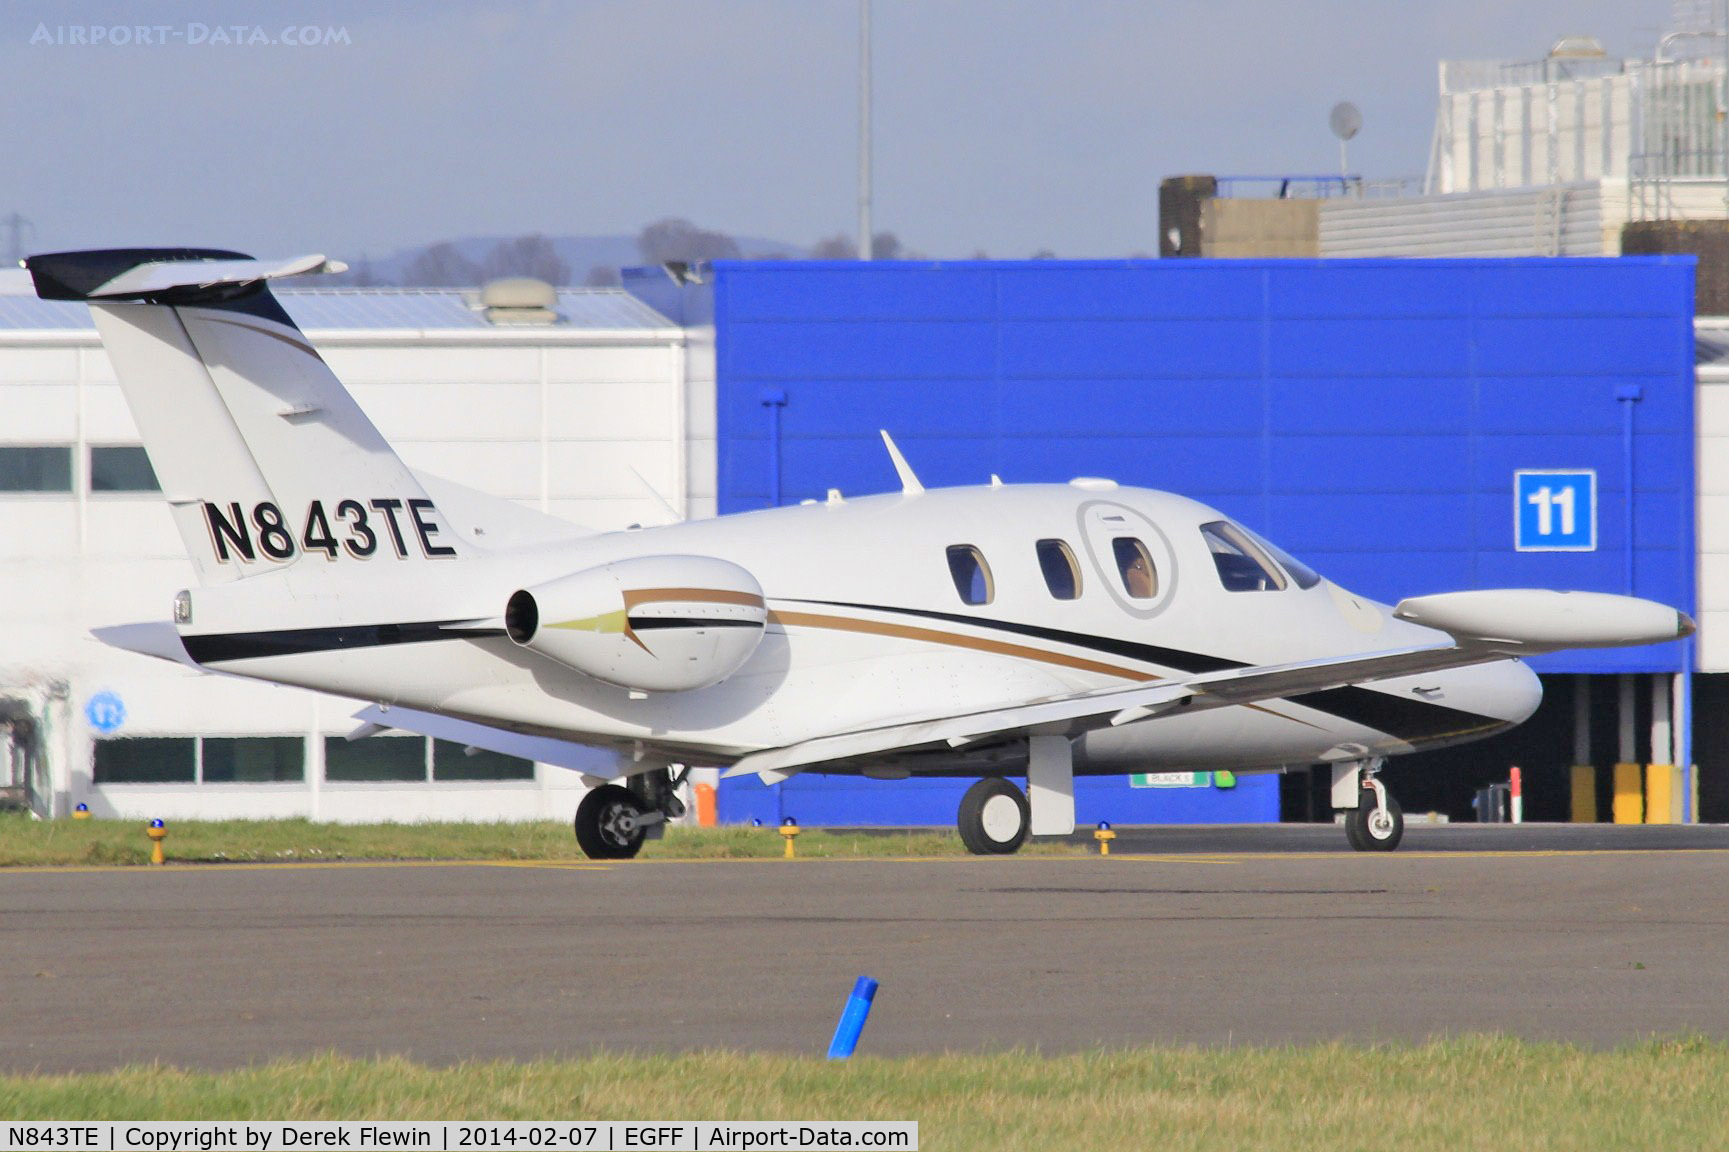 N843TE, 2007 Eclipse Aviation Corp EA500 C/N 000072, Eclipse 500, taxxing out at EGFF, en-route to Blackbushe.